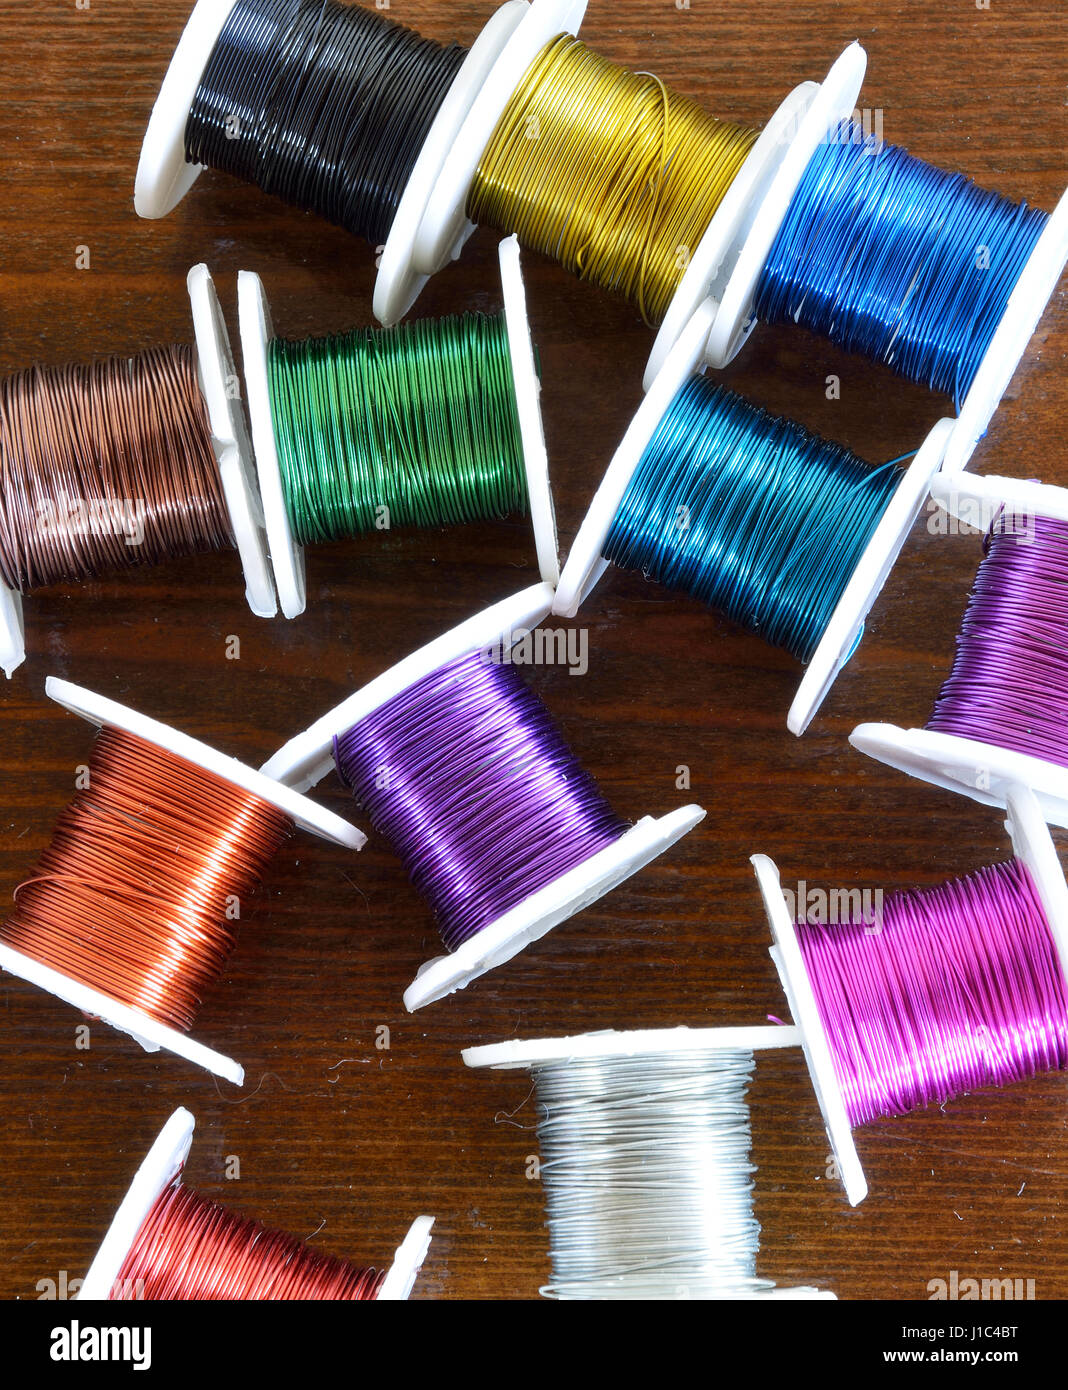 Color thin wire crafts on wooden surface Stock Photo - Alamy